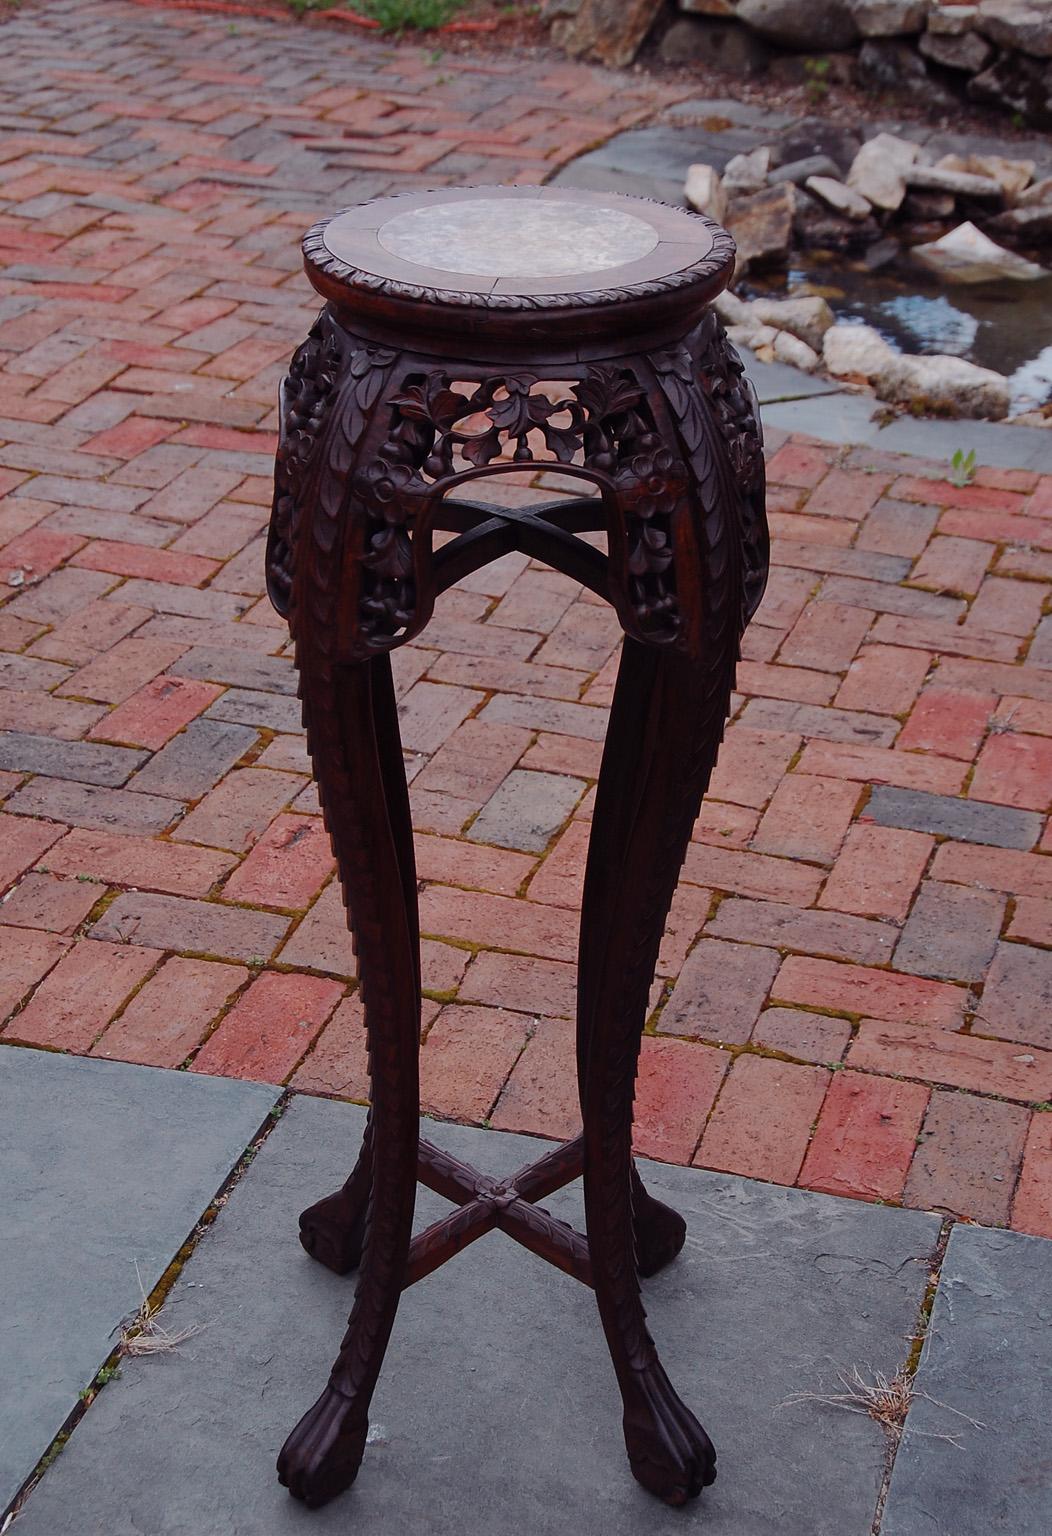 Chinese Qing dynasty carved rosewood pedestal with inset rose marble top. The elegant tall cabriole legs are connected by two cross stretchers, one near the top and one near the feet; having two cross stretchers increases the stability and strength